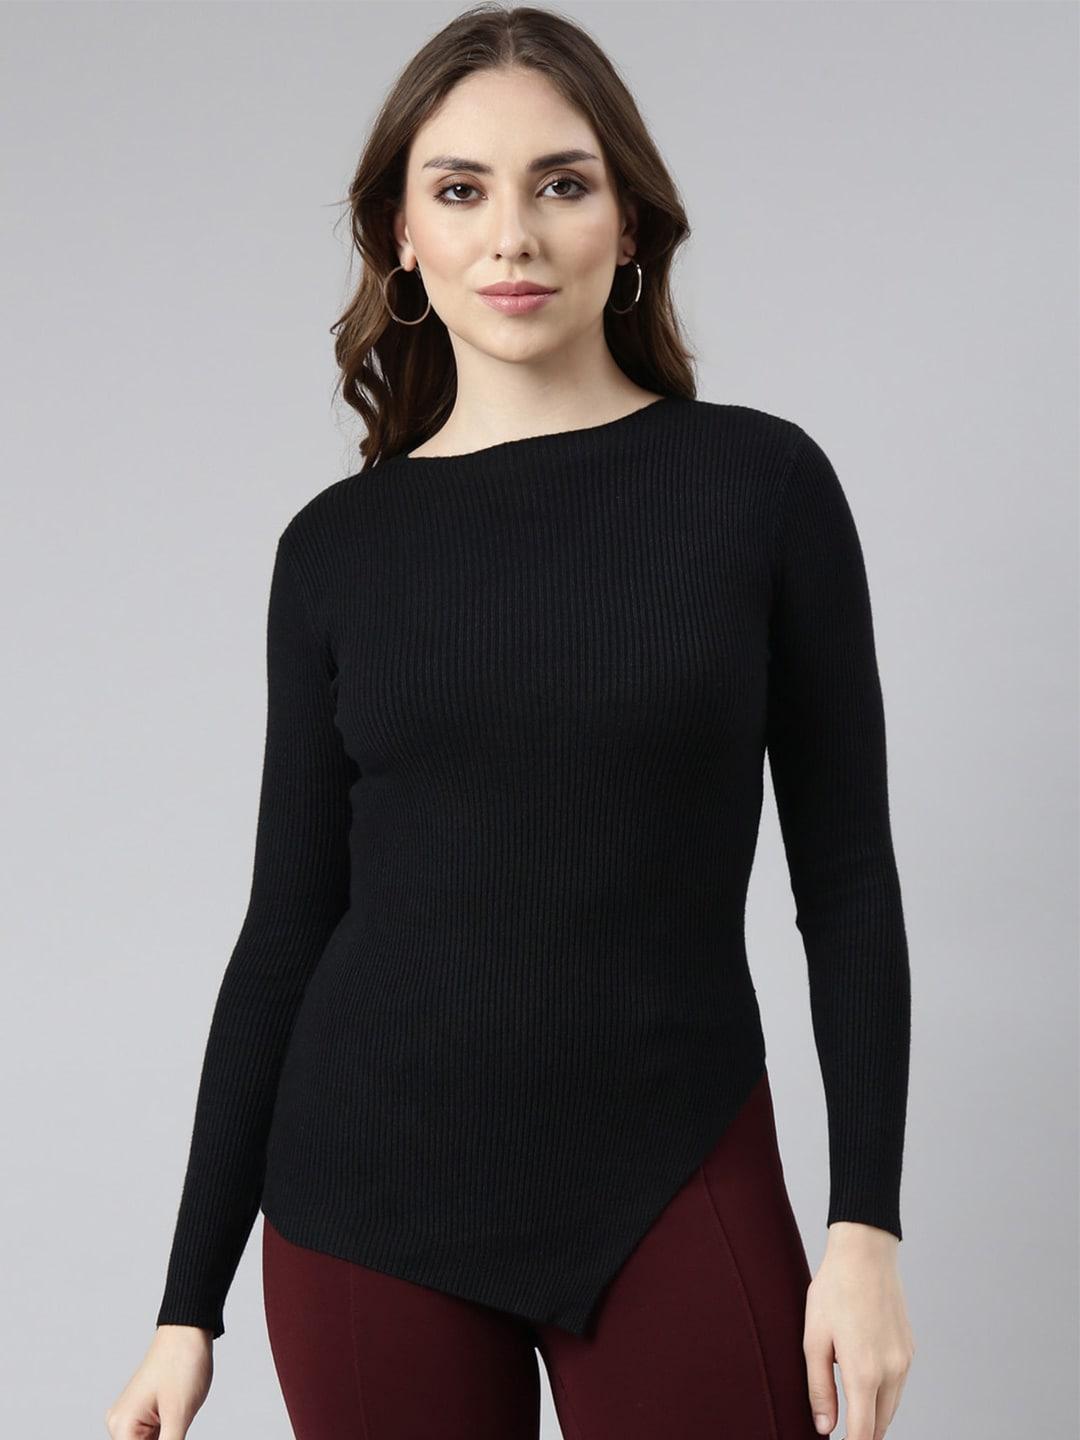 showoff-long-sleeves-round-neck-top